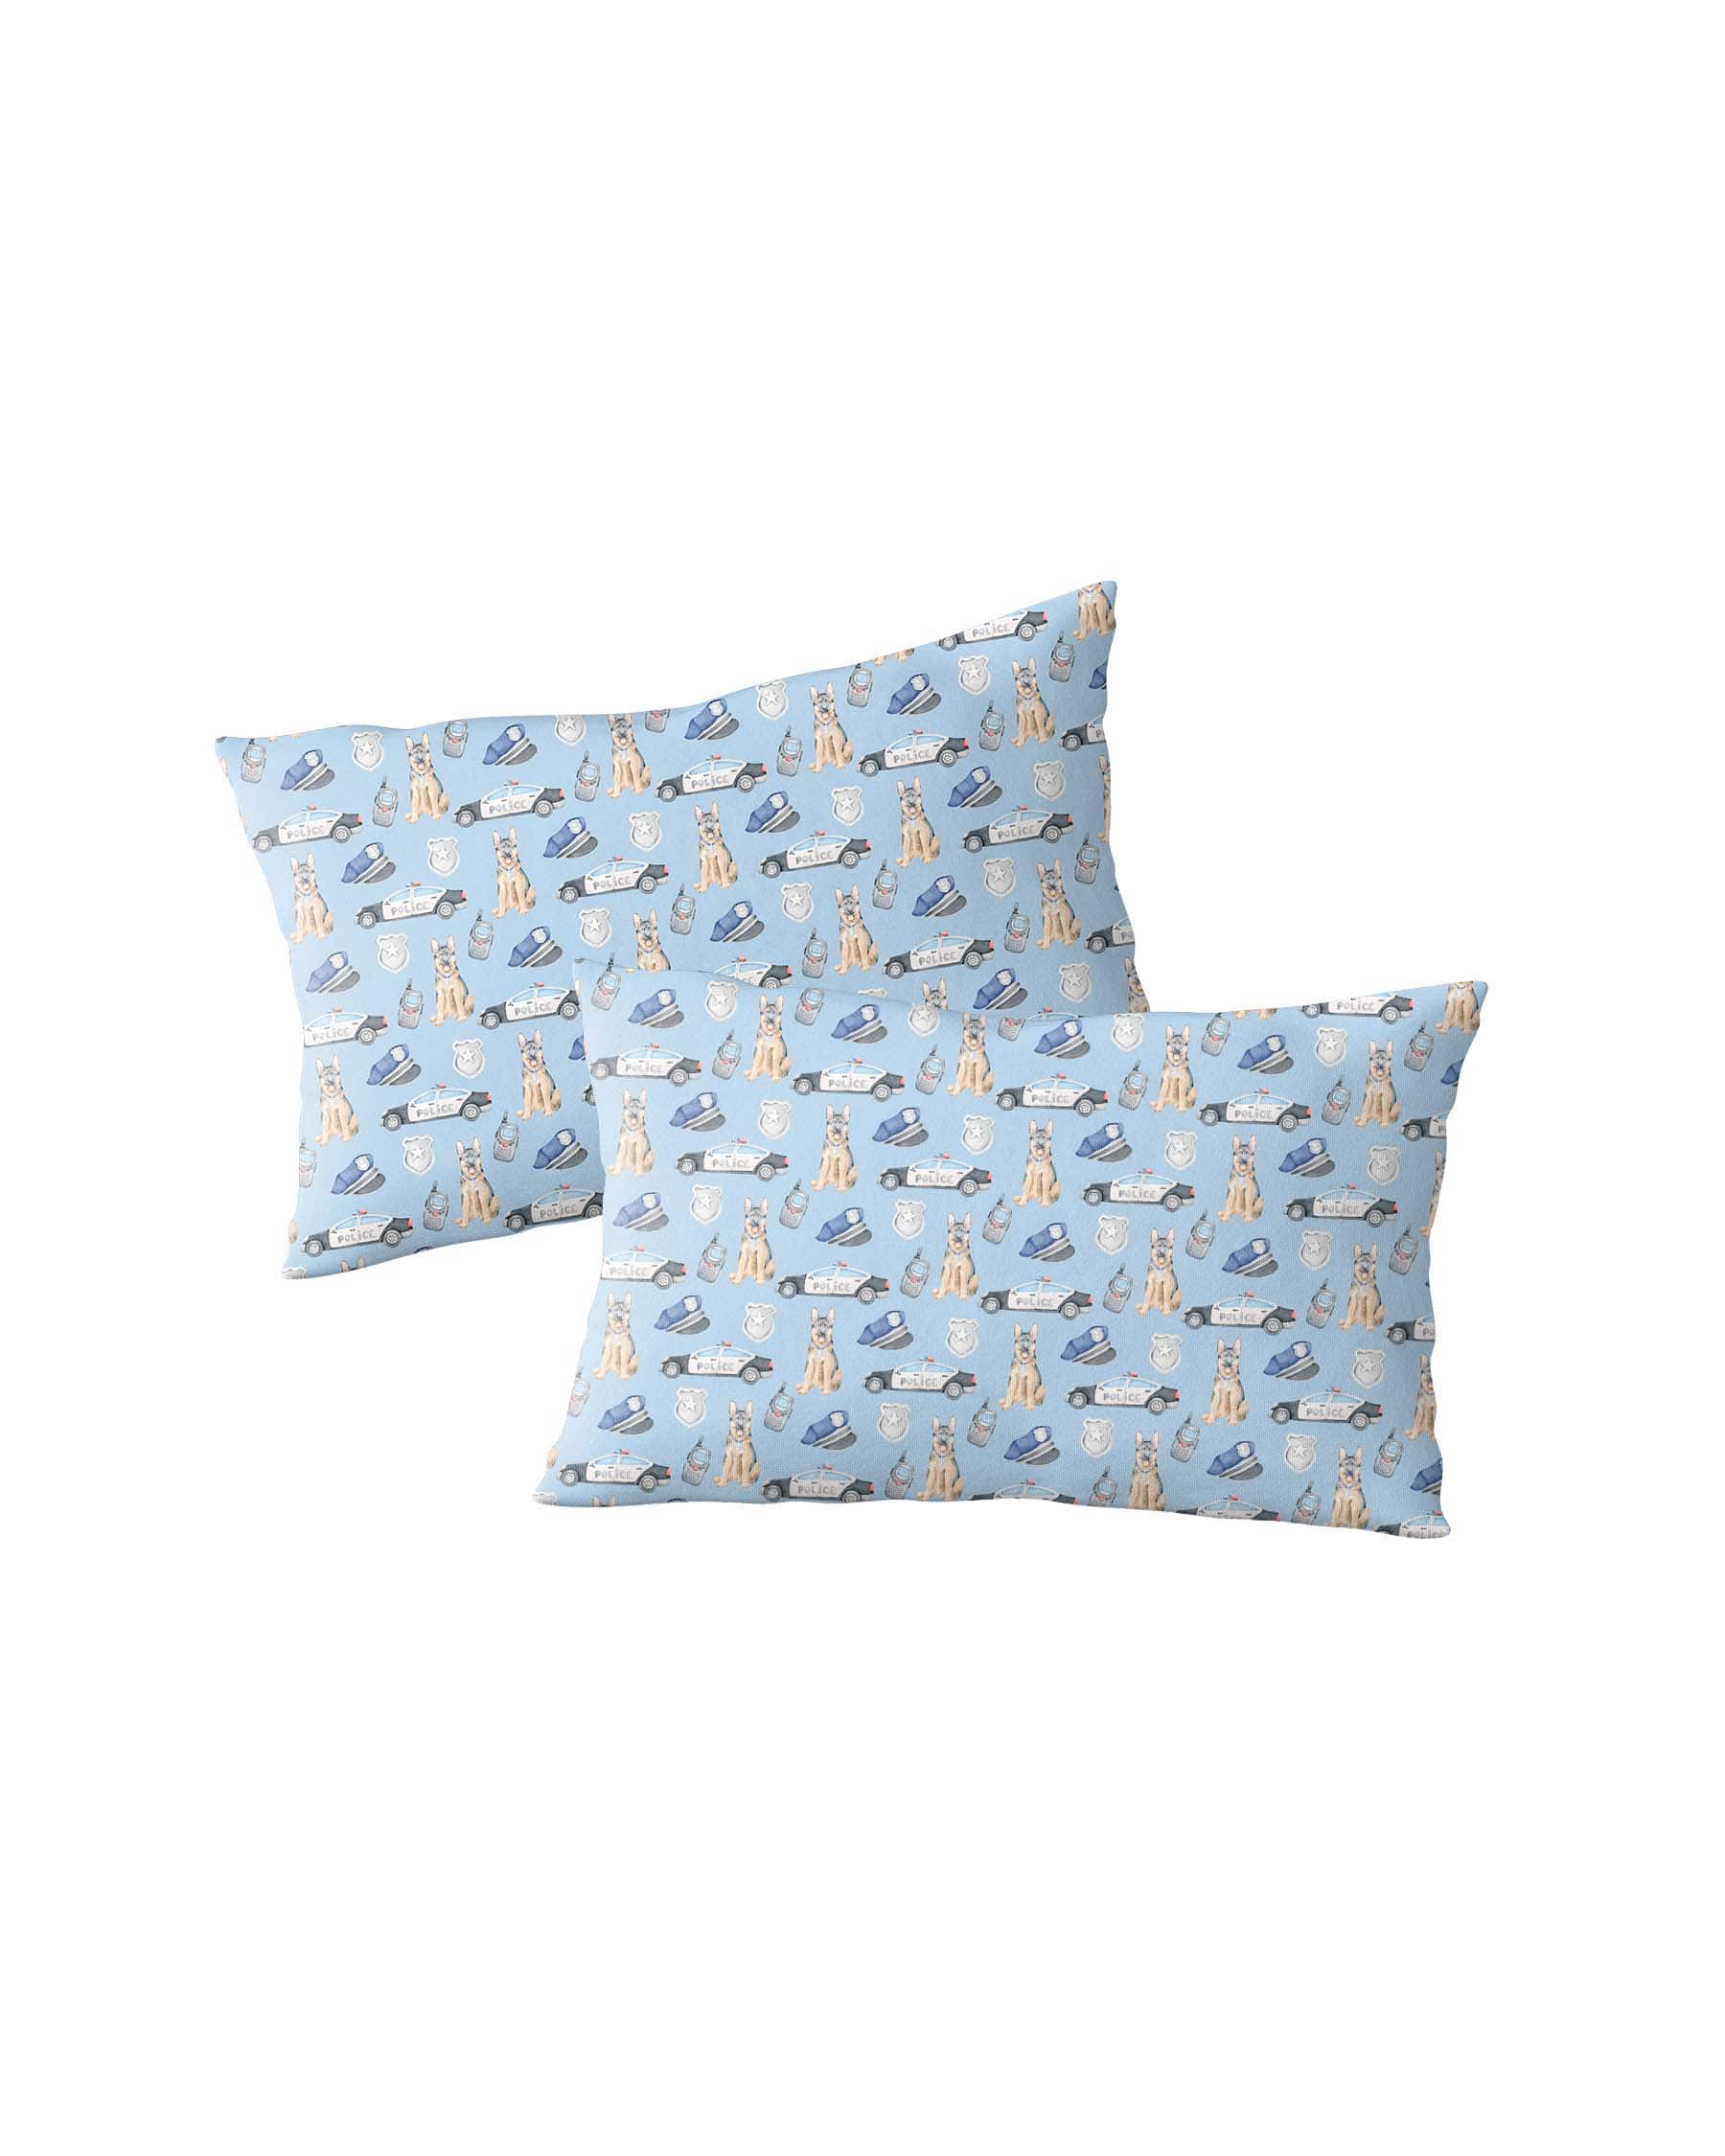 Police Pillowcases: Set of 2